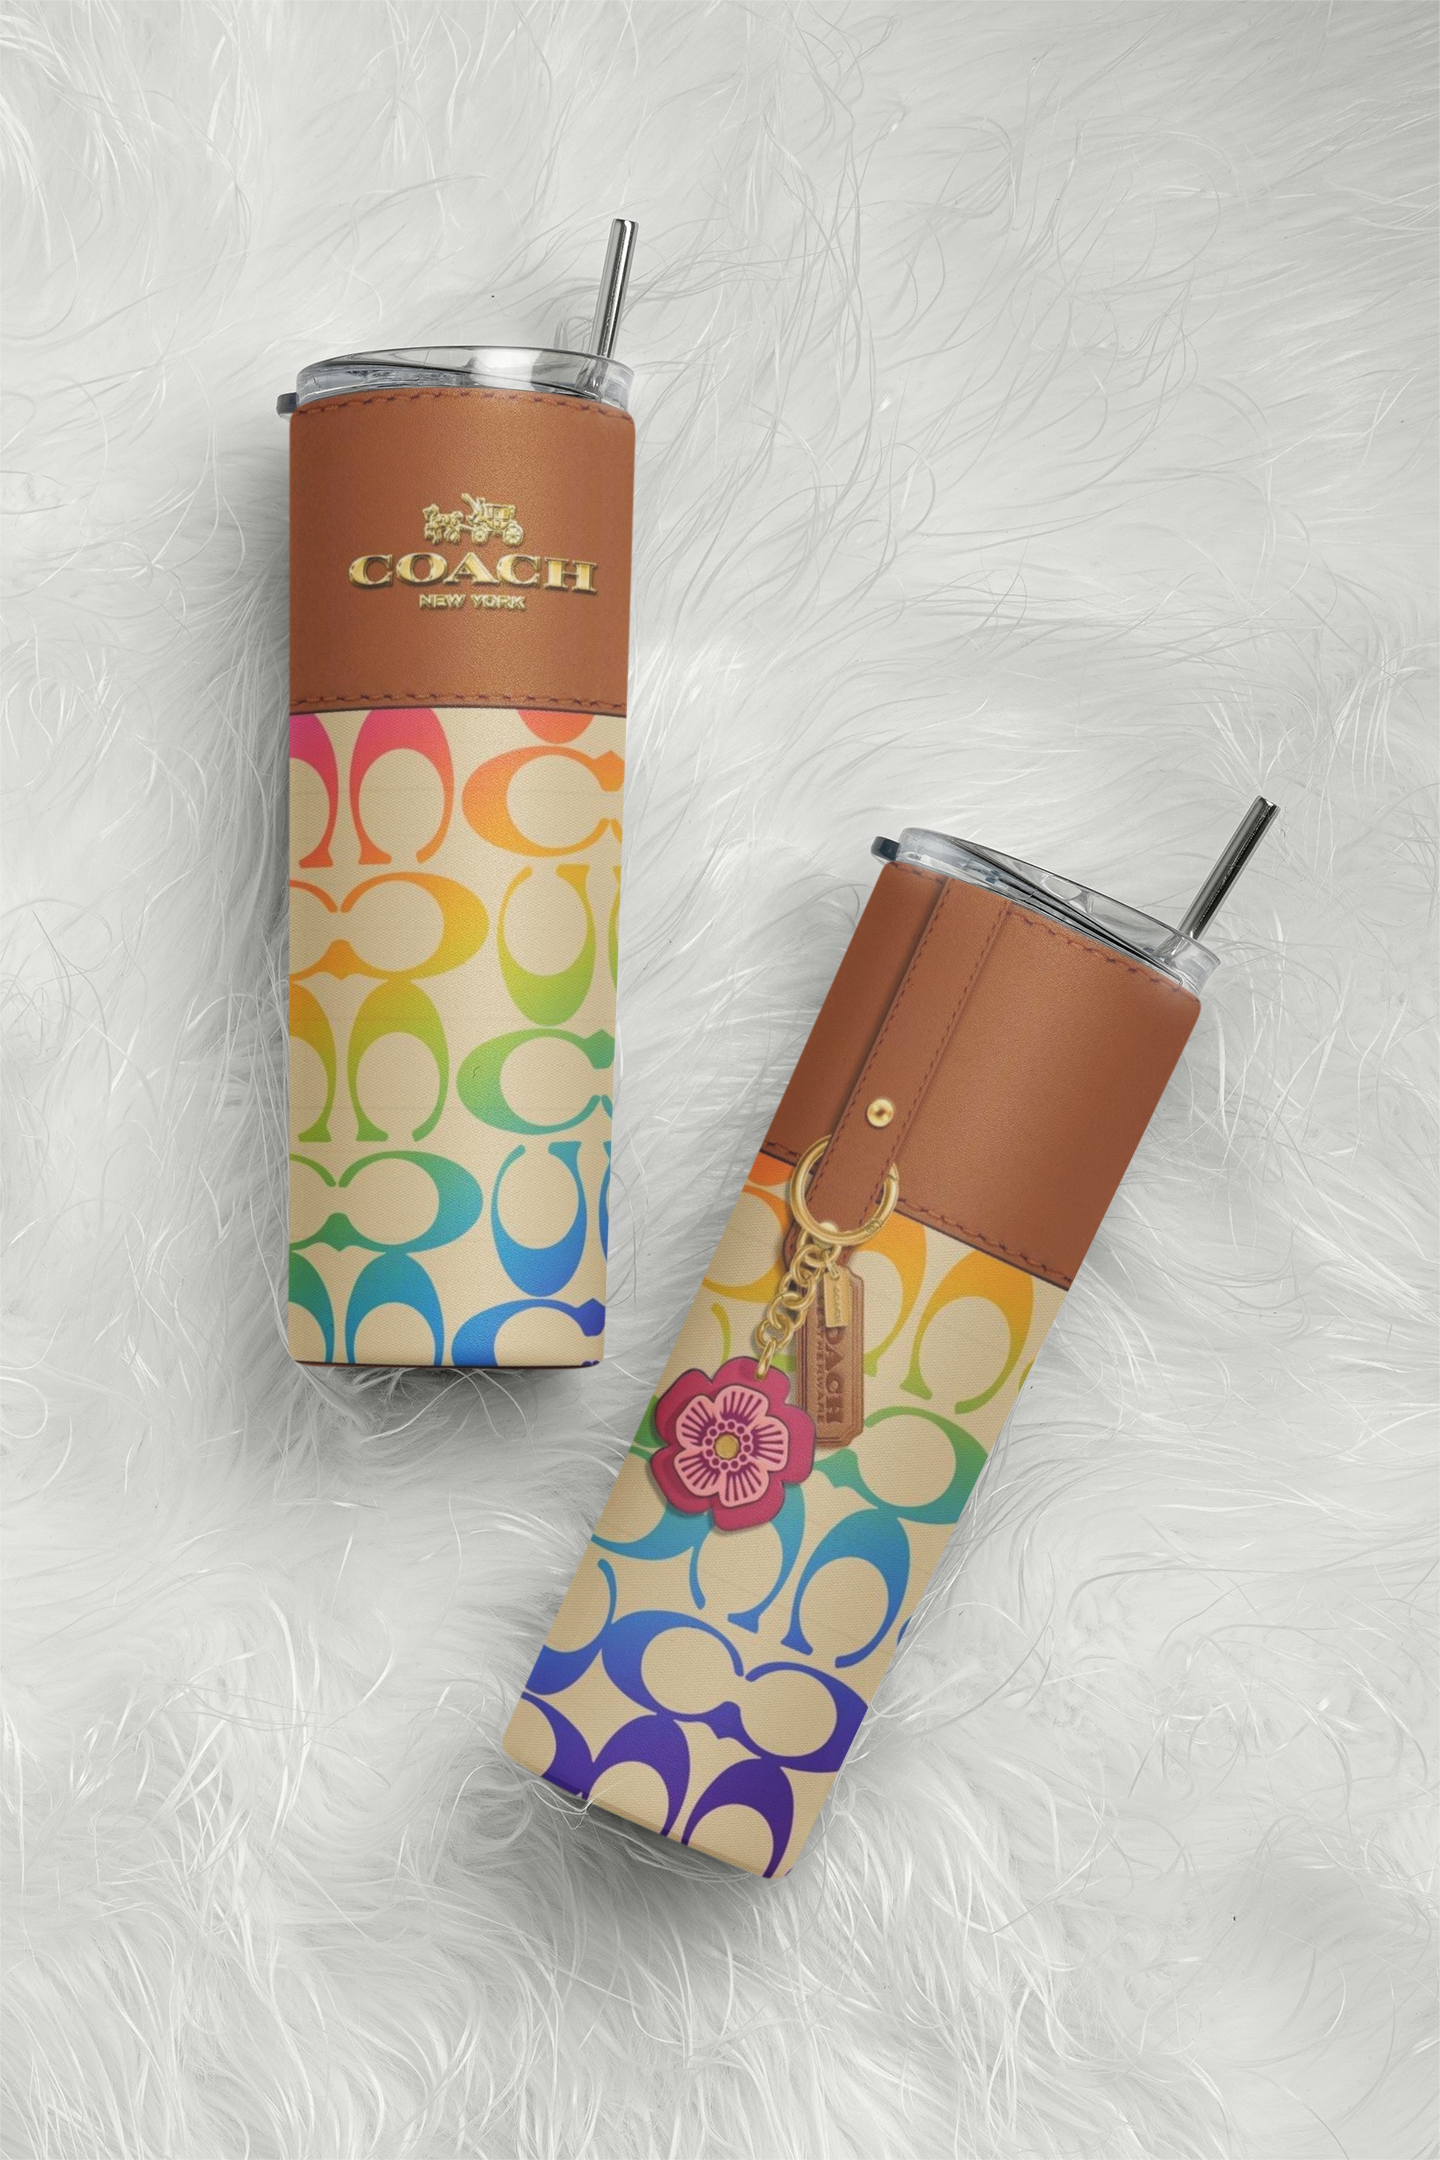 Coach Inspired 20oz Stainless Steel Tumbler